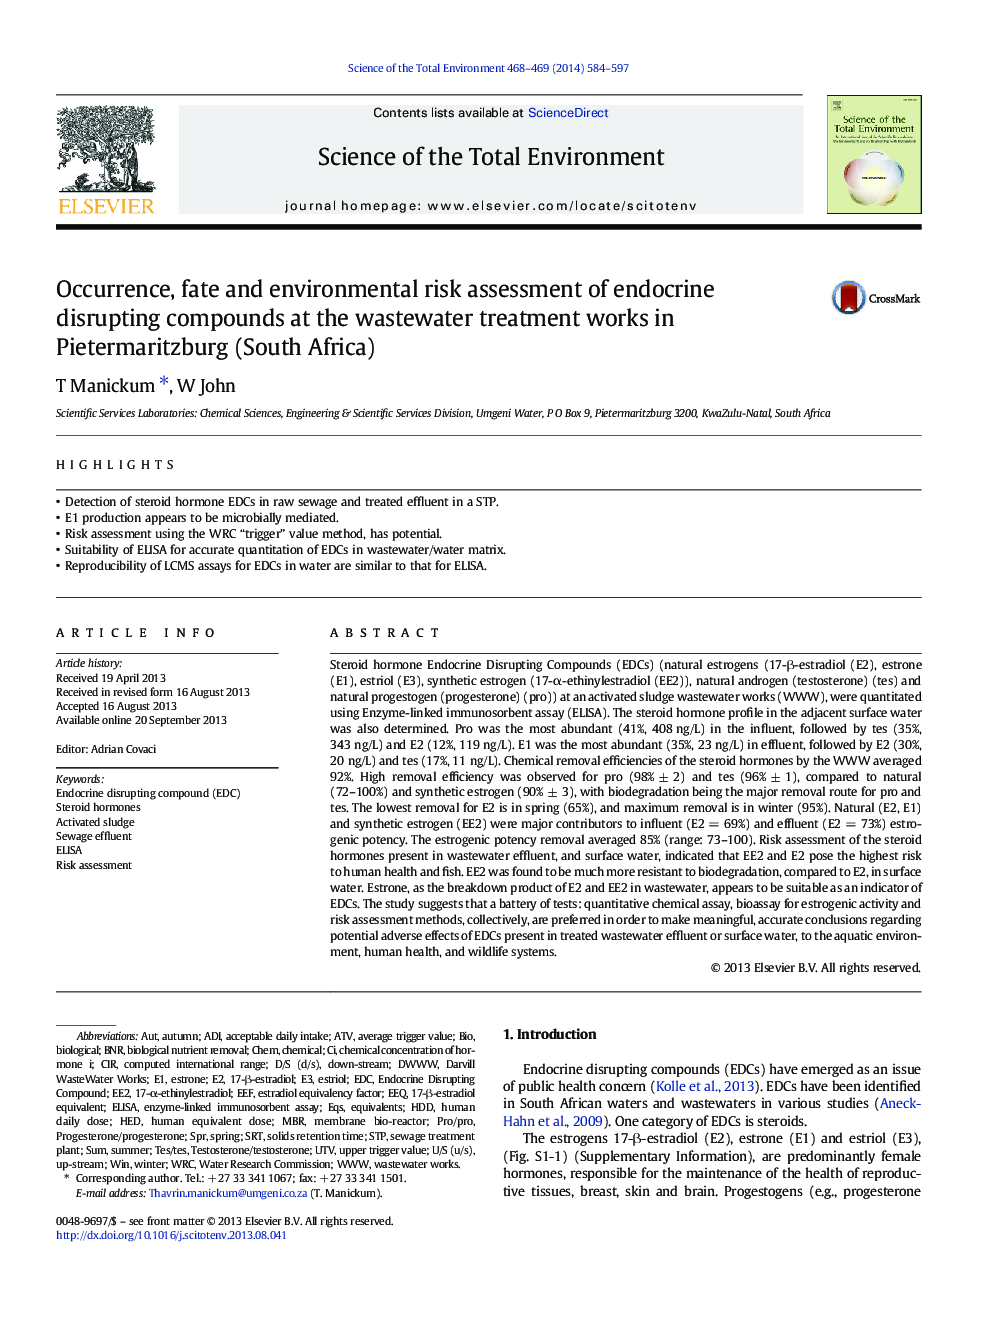 Occurrence, fate and environmental risk assessment of endocrine disrupting compounds at the wastewater treatment works in Pietermaritzburg (South Africa)